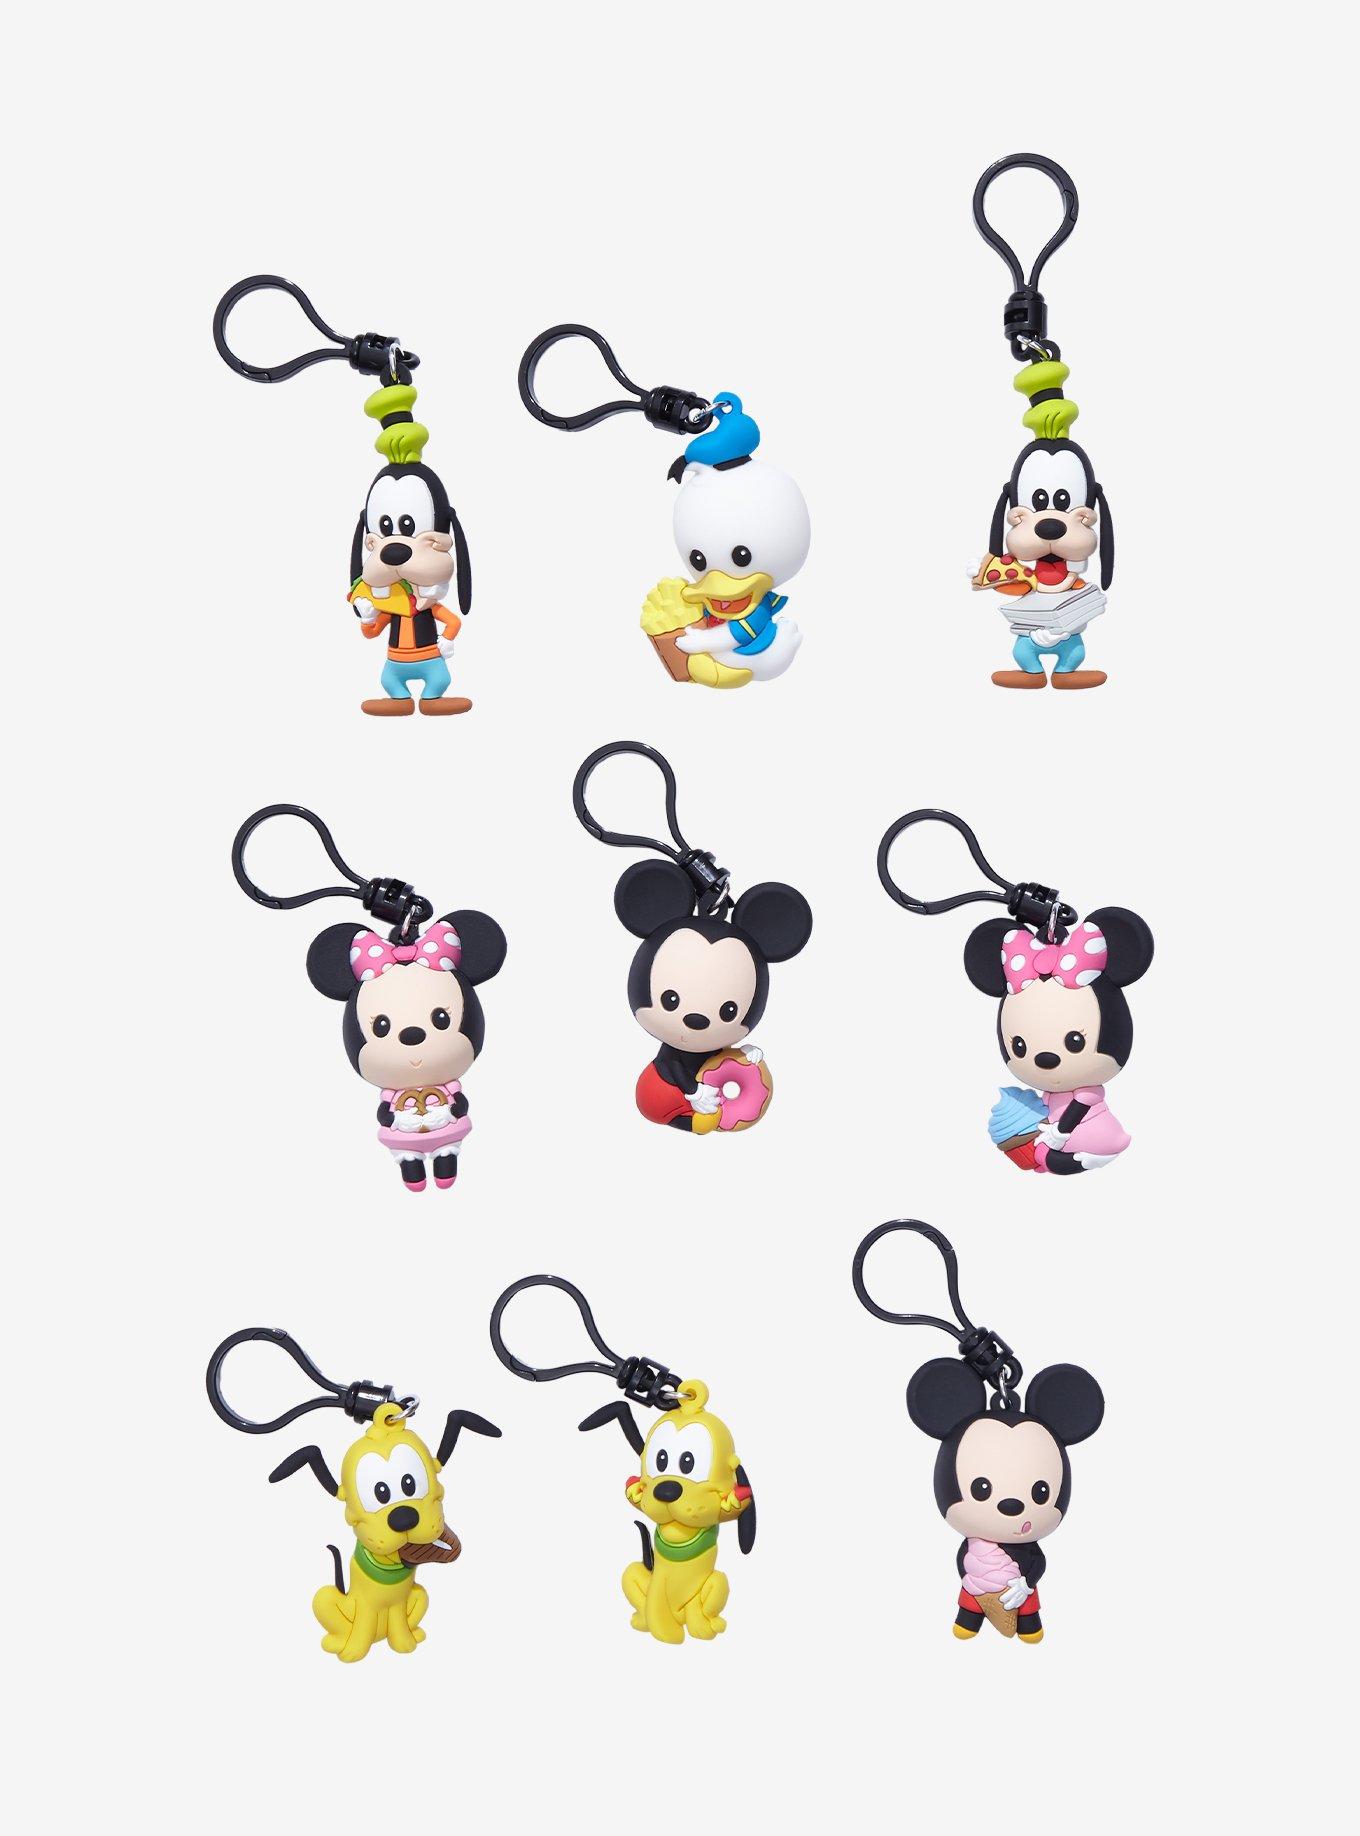 Mickey Mouse Keychain Cute Collection Character Pendant Key Ring